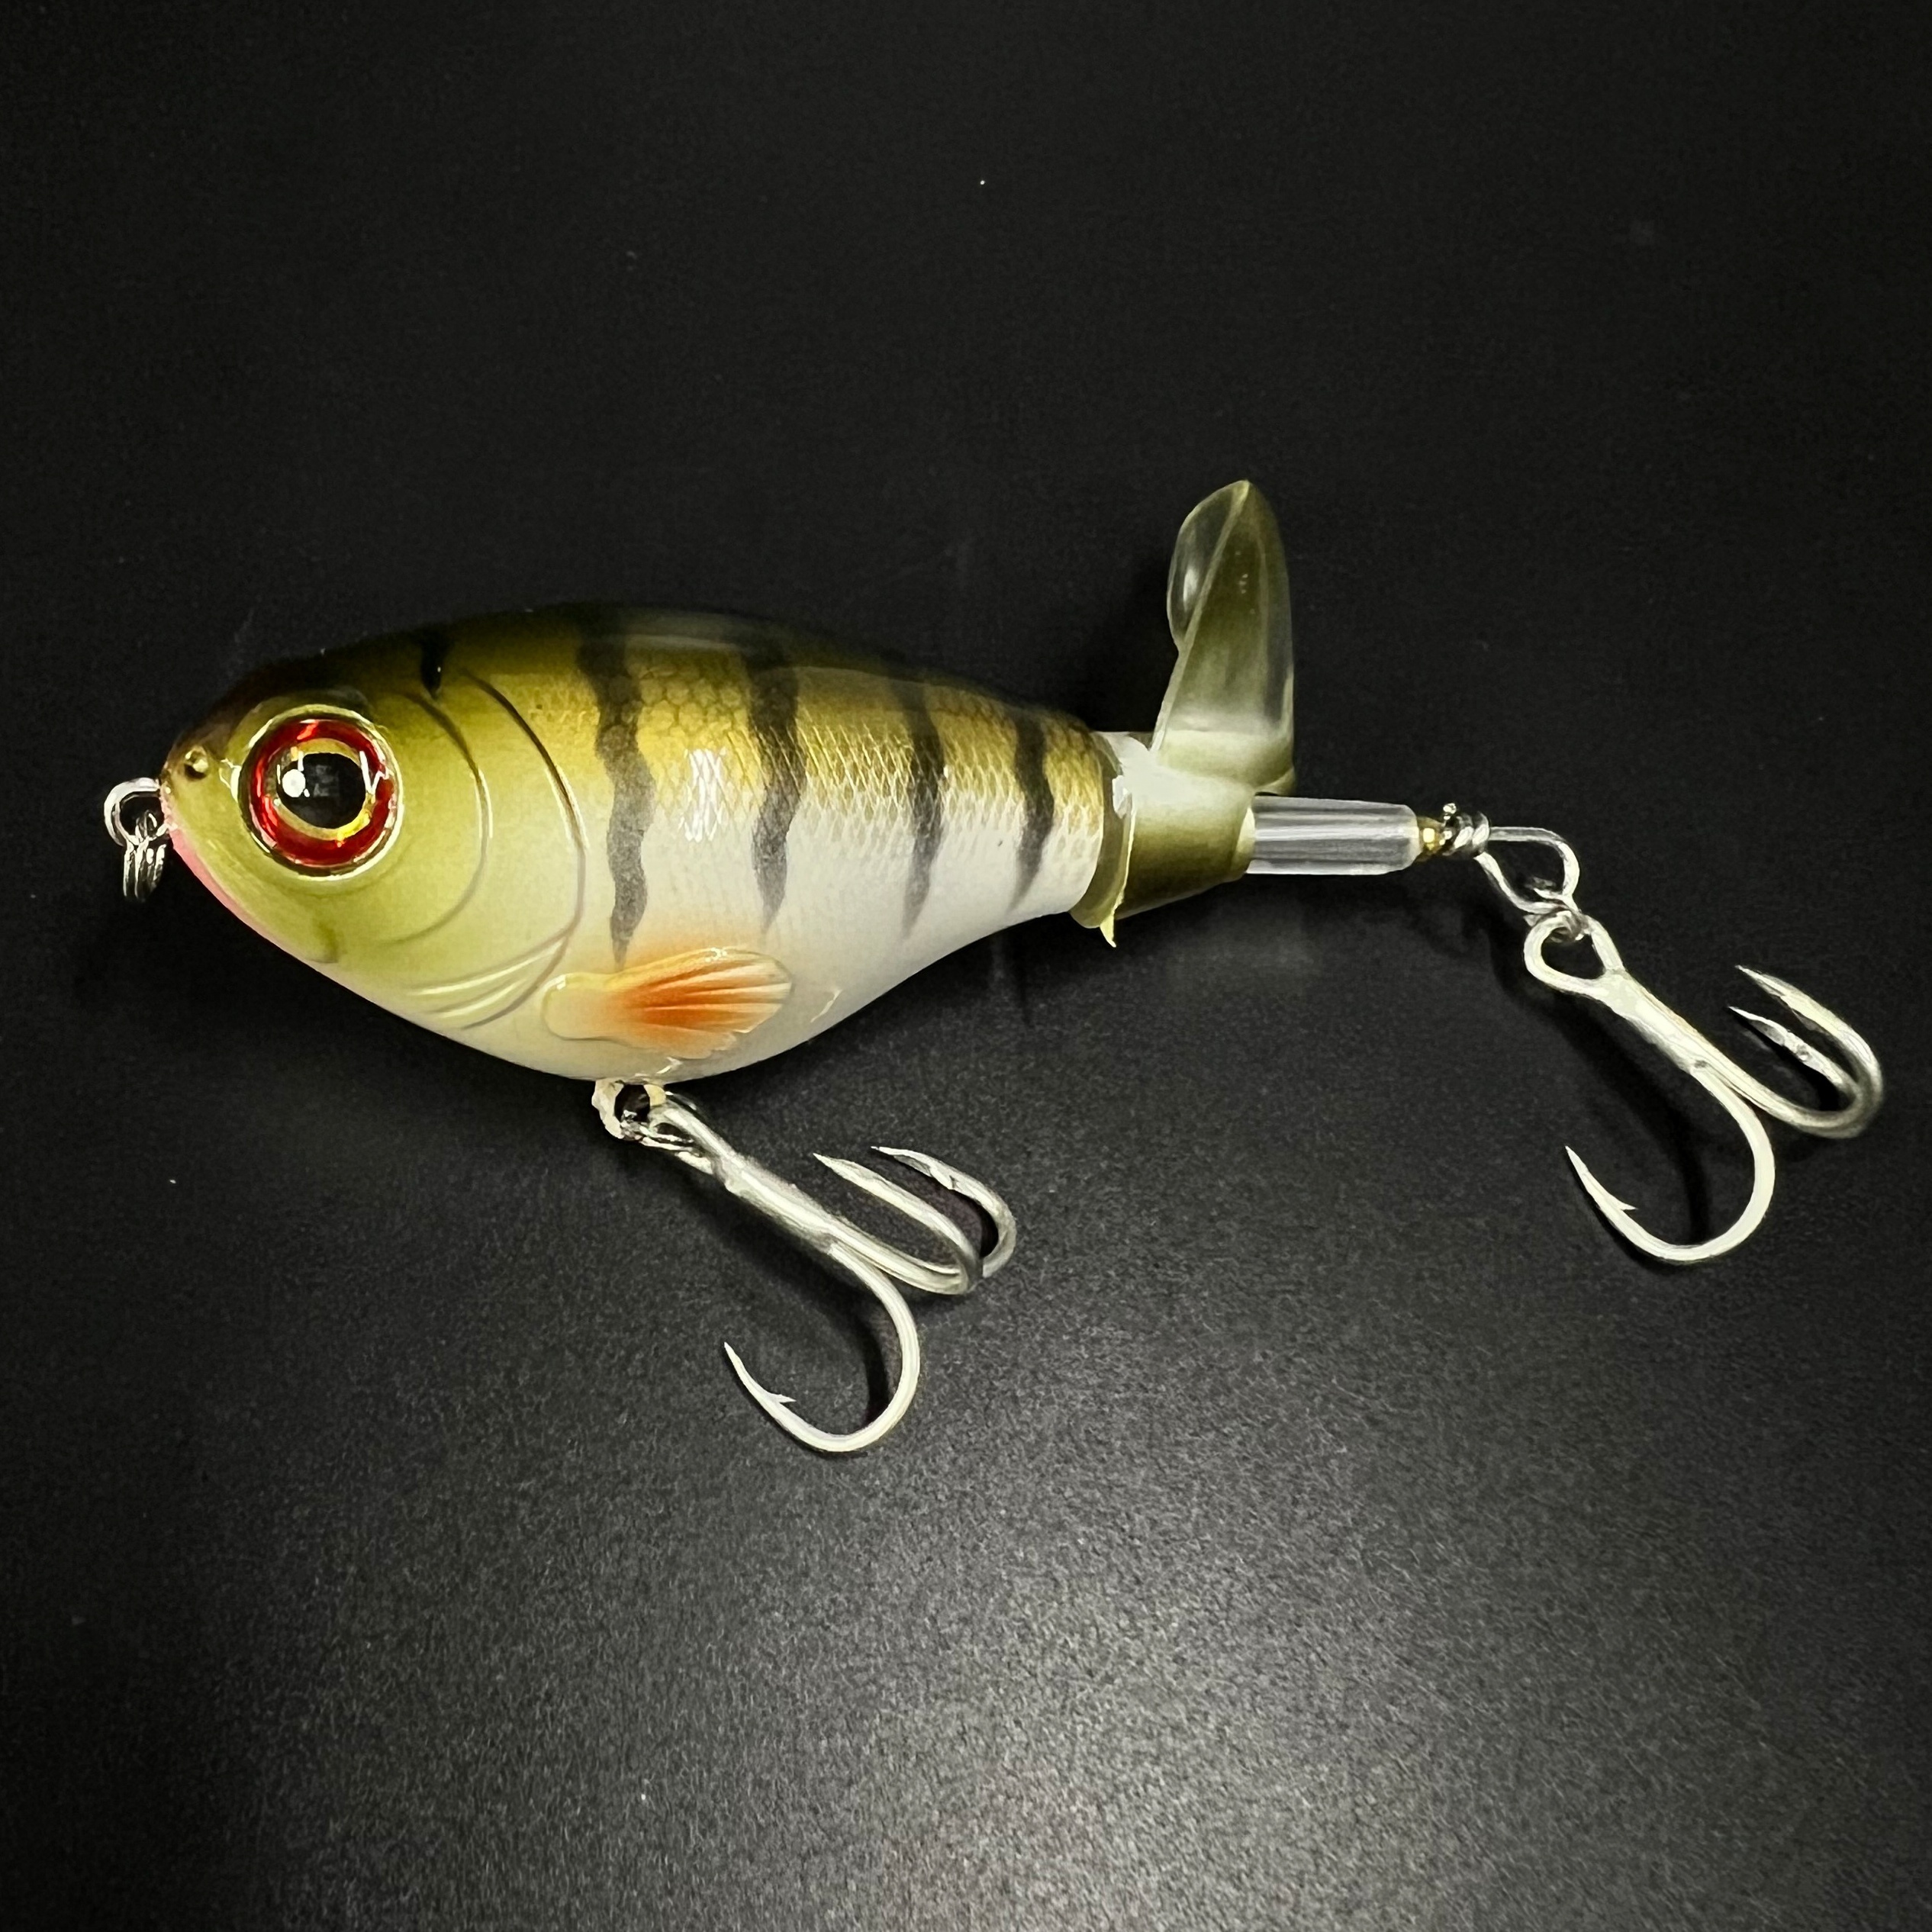 6.4g/11.9g Fishing Lures With Propeller Tail Long-casting Artificial Hard  Bait For Bass Catfish Pike Perch 